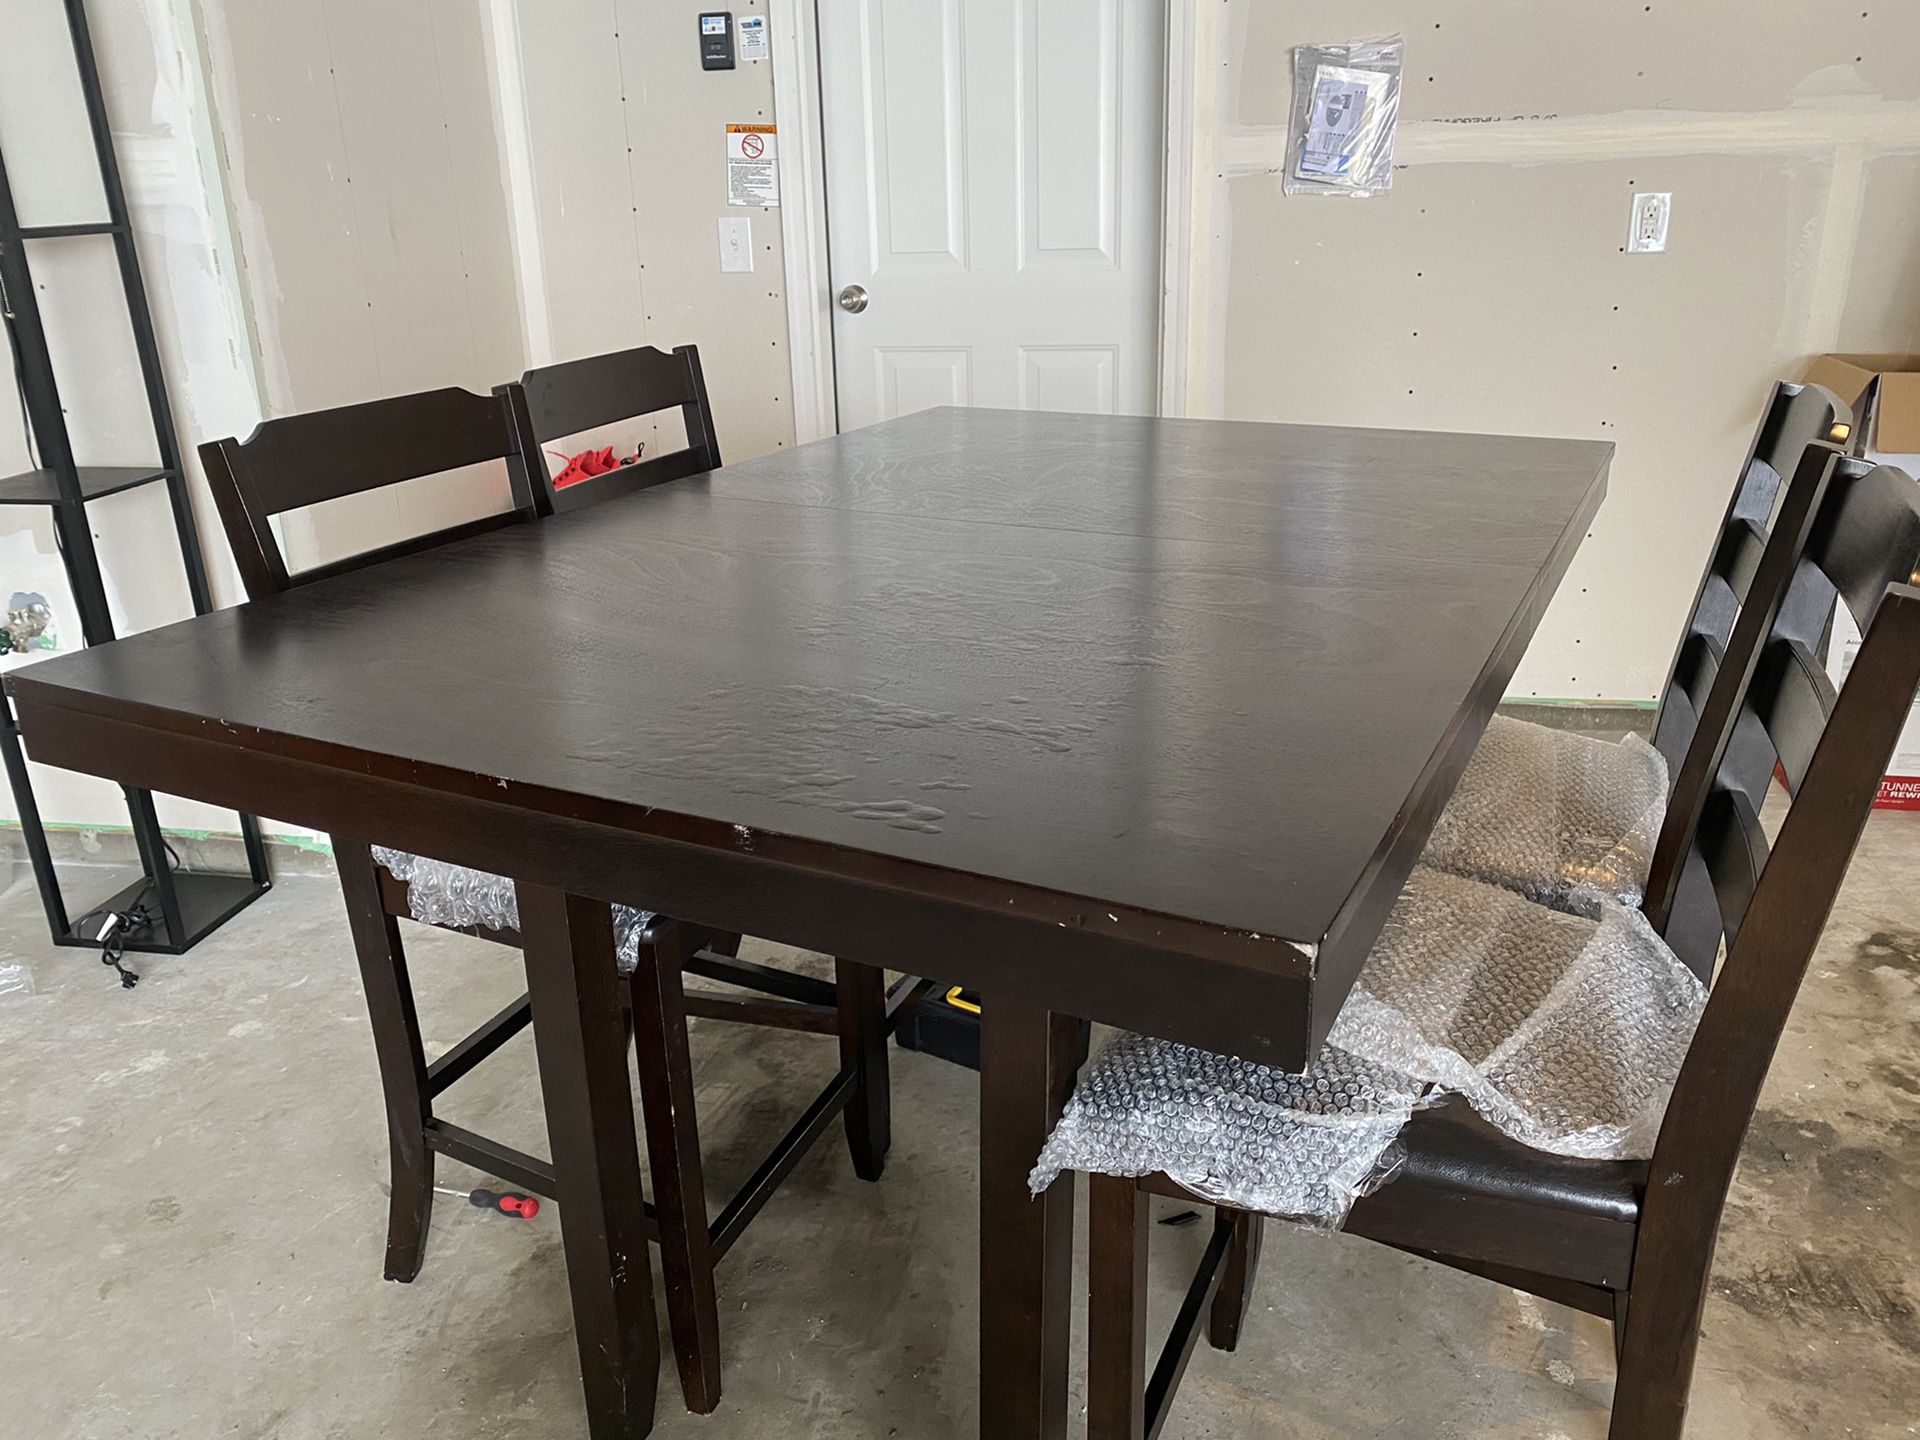 Dark Brown Dining Table (4 chairs) with extended leaf and bottom storage shelving